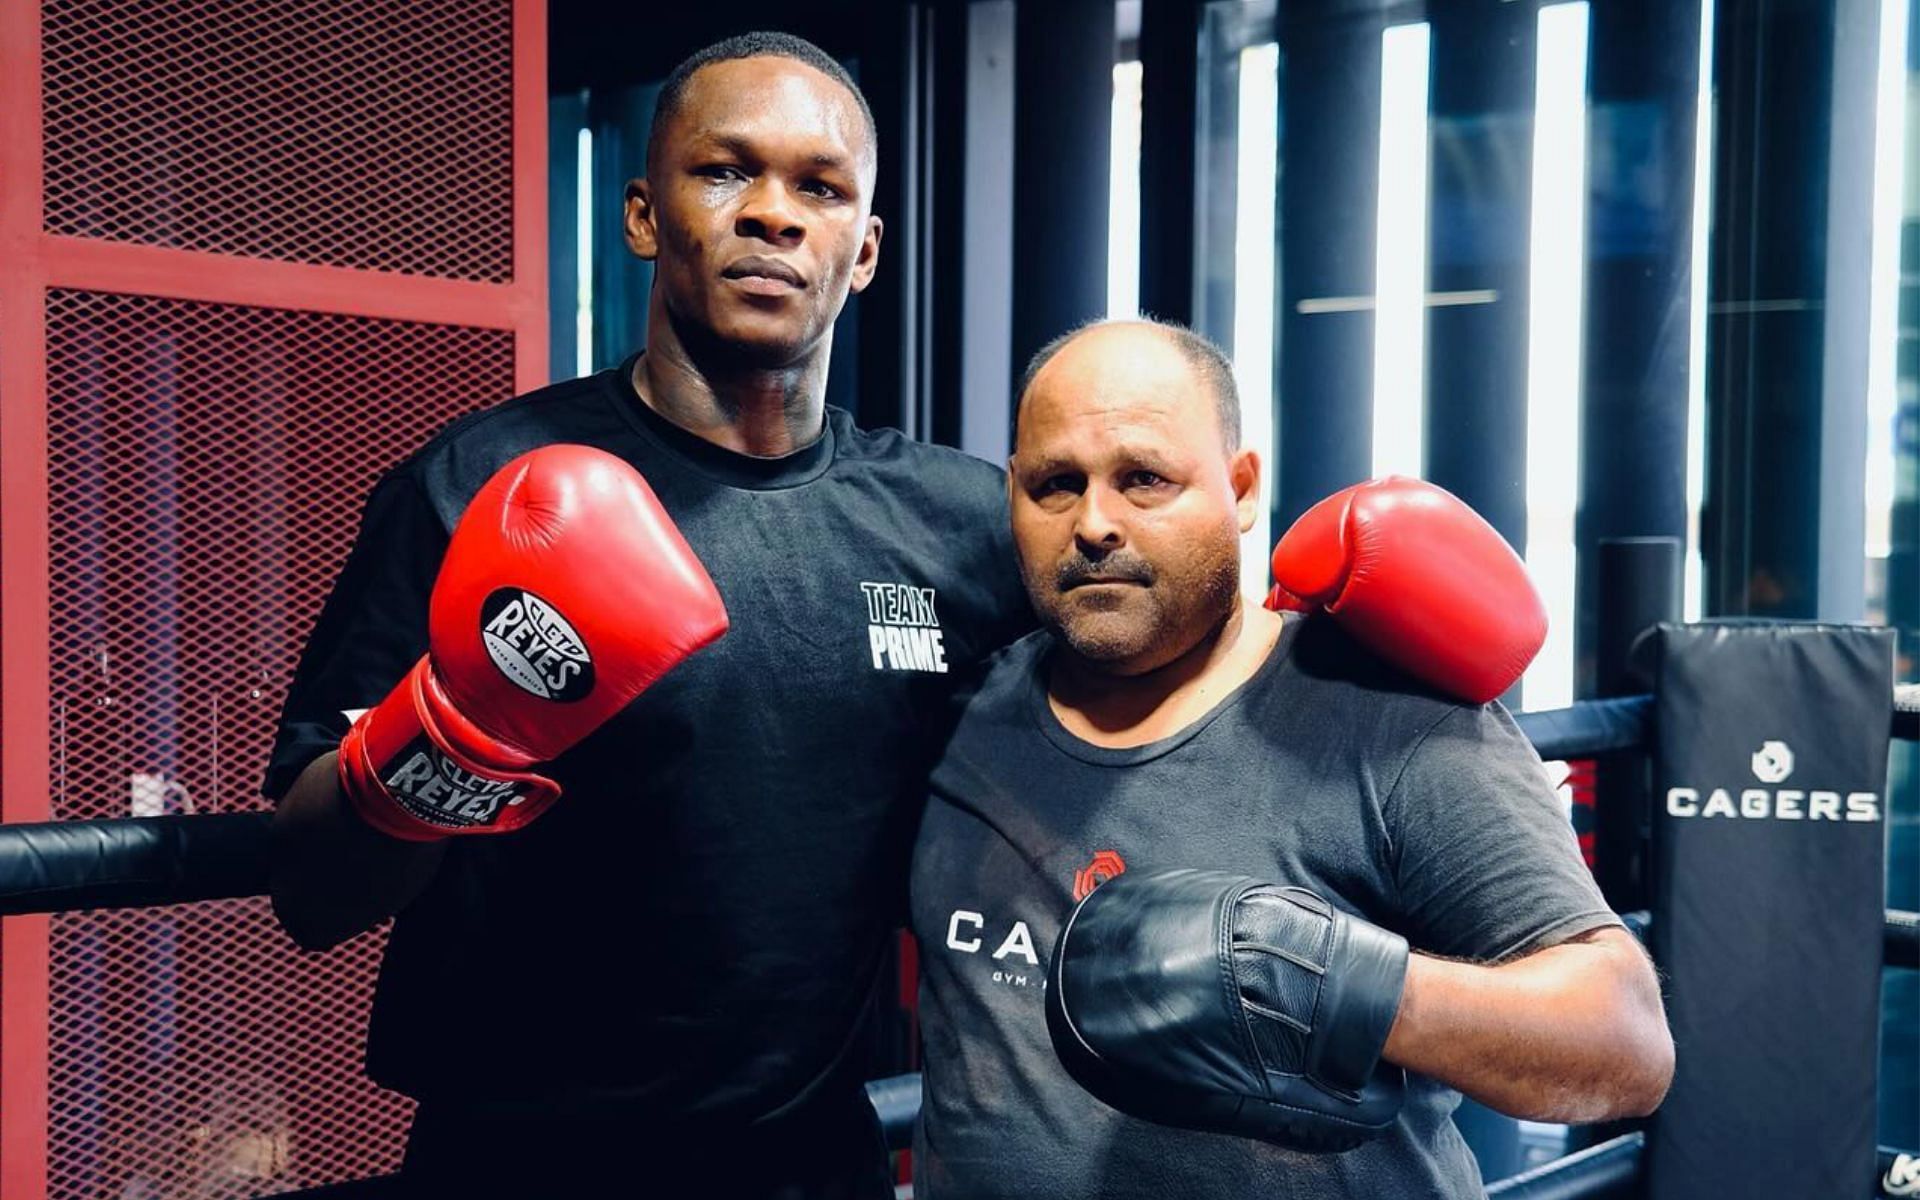 Israel Adesanya (left) honing his boxing skills during hiatus from fighting competition [Photo Courtesy @stylebender on Instagram]